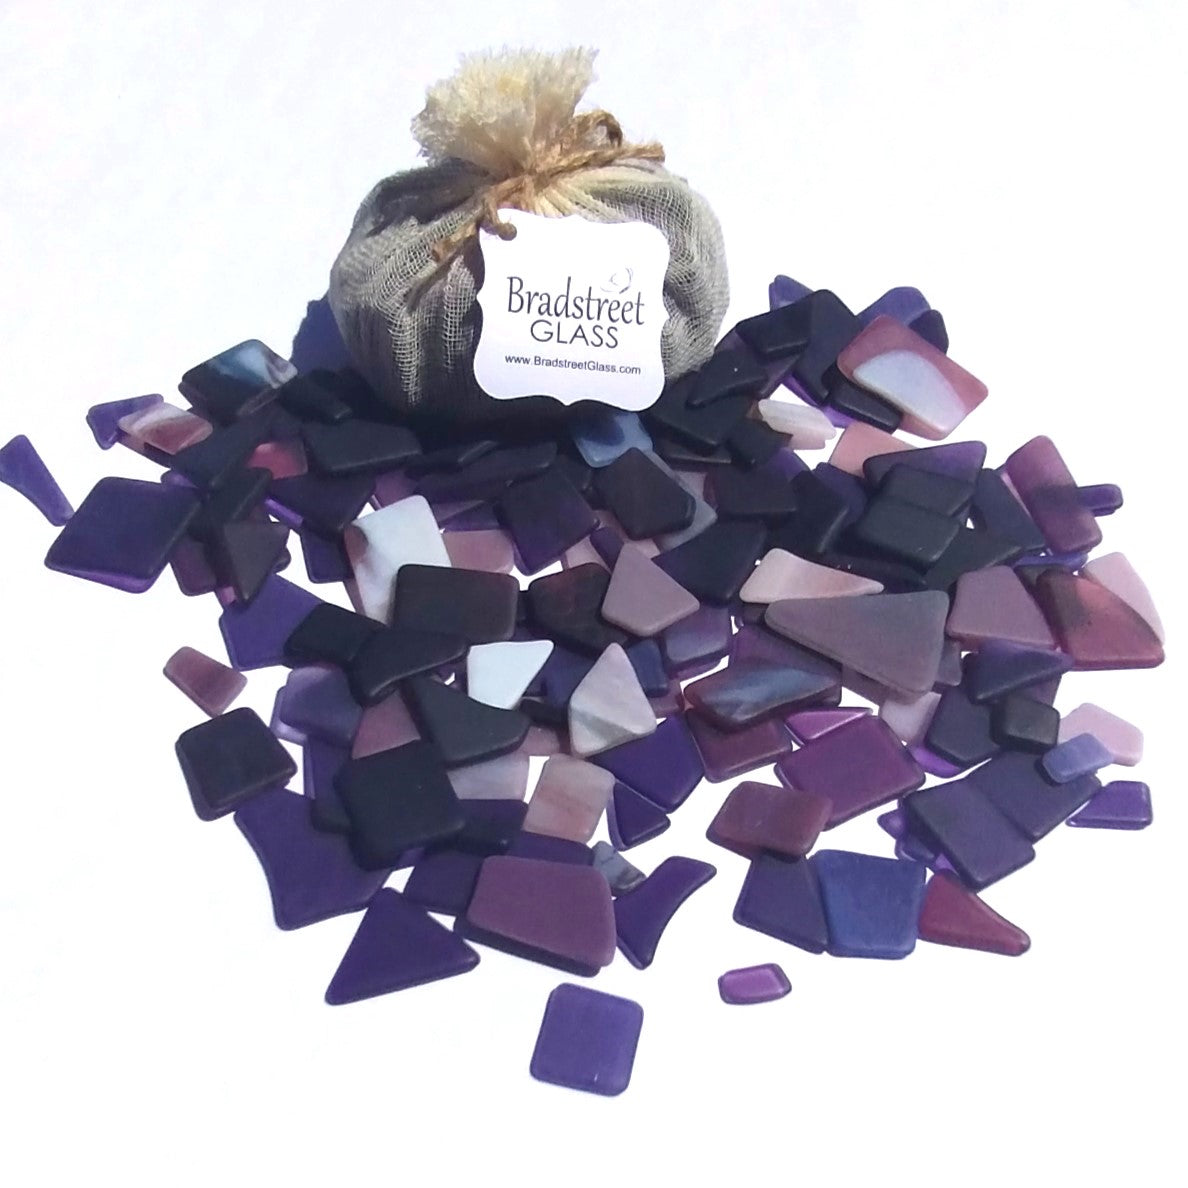 Bradstreet Glass Purple Tumbled Stained Glass 1/2 pound "Sea Glass" in Shades of Purple